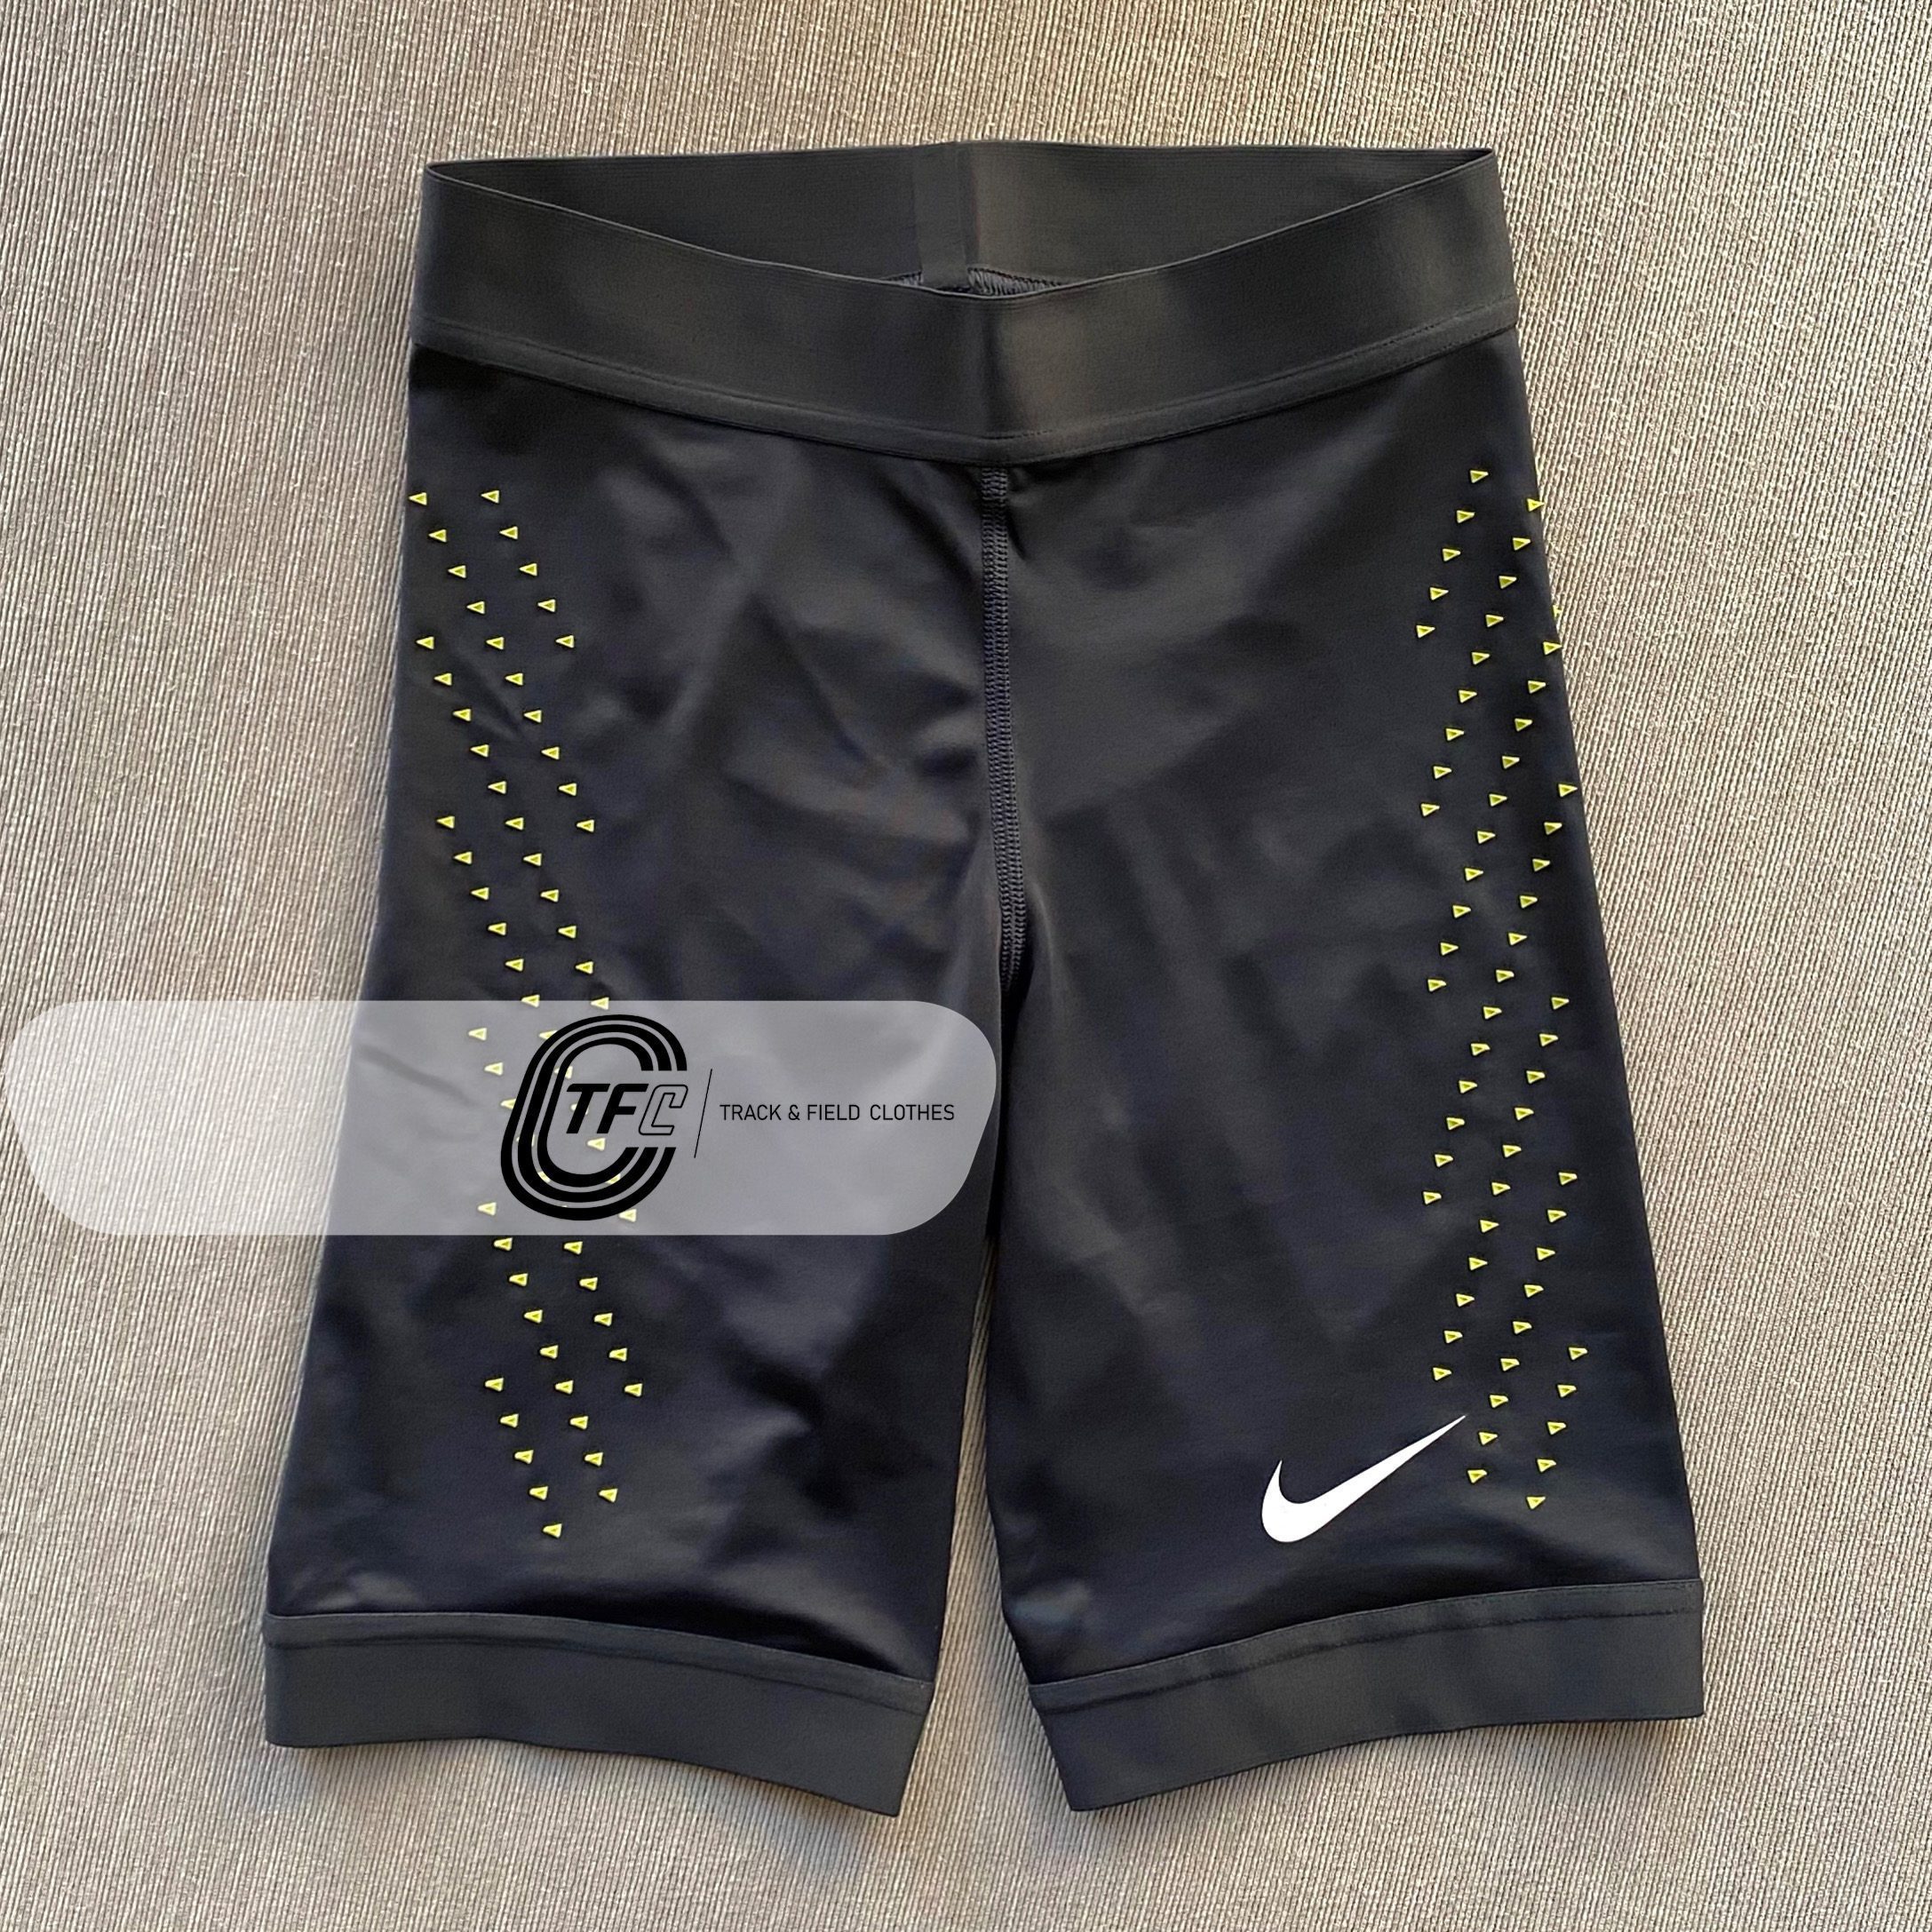 Nike 2016 Germany Olympic Team Pro Elite Half Tights Trackandfieldclothes